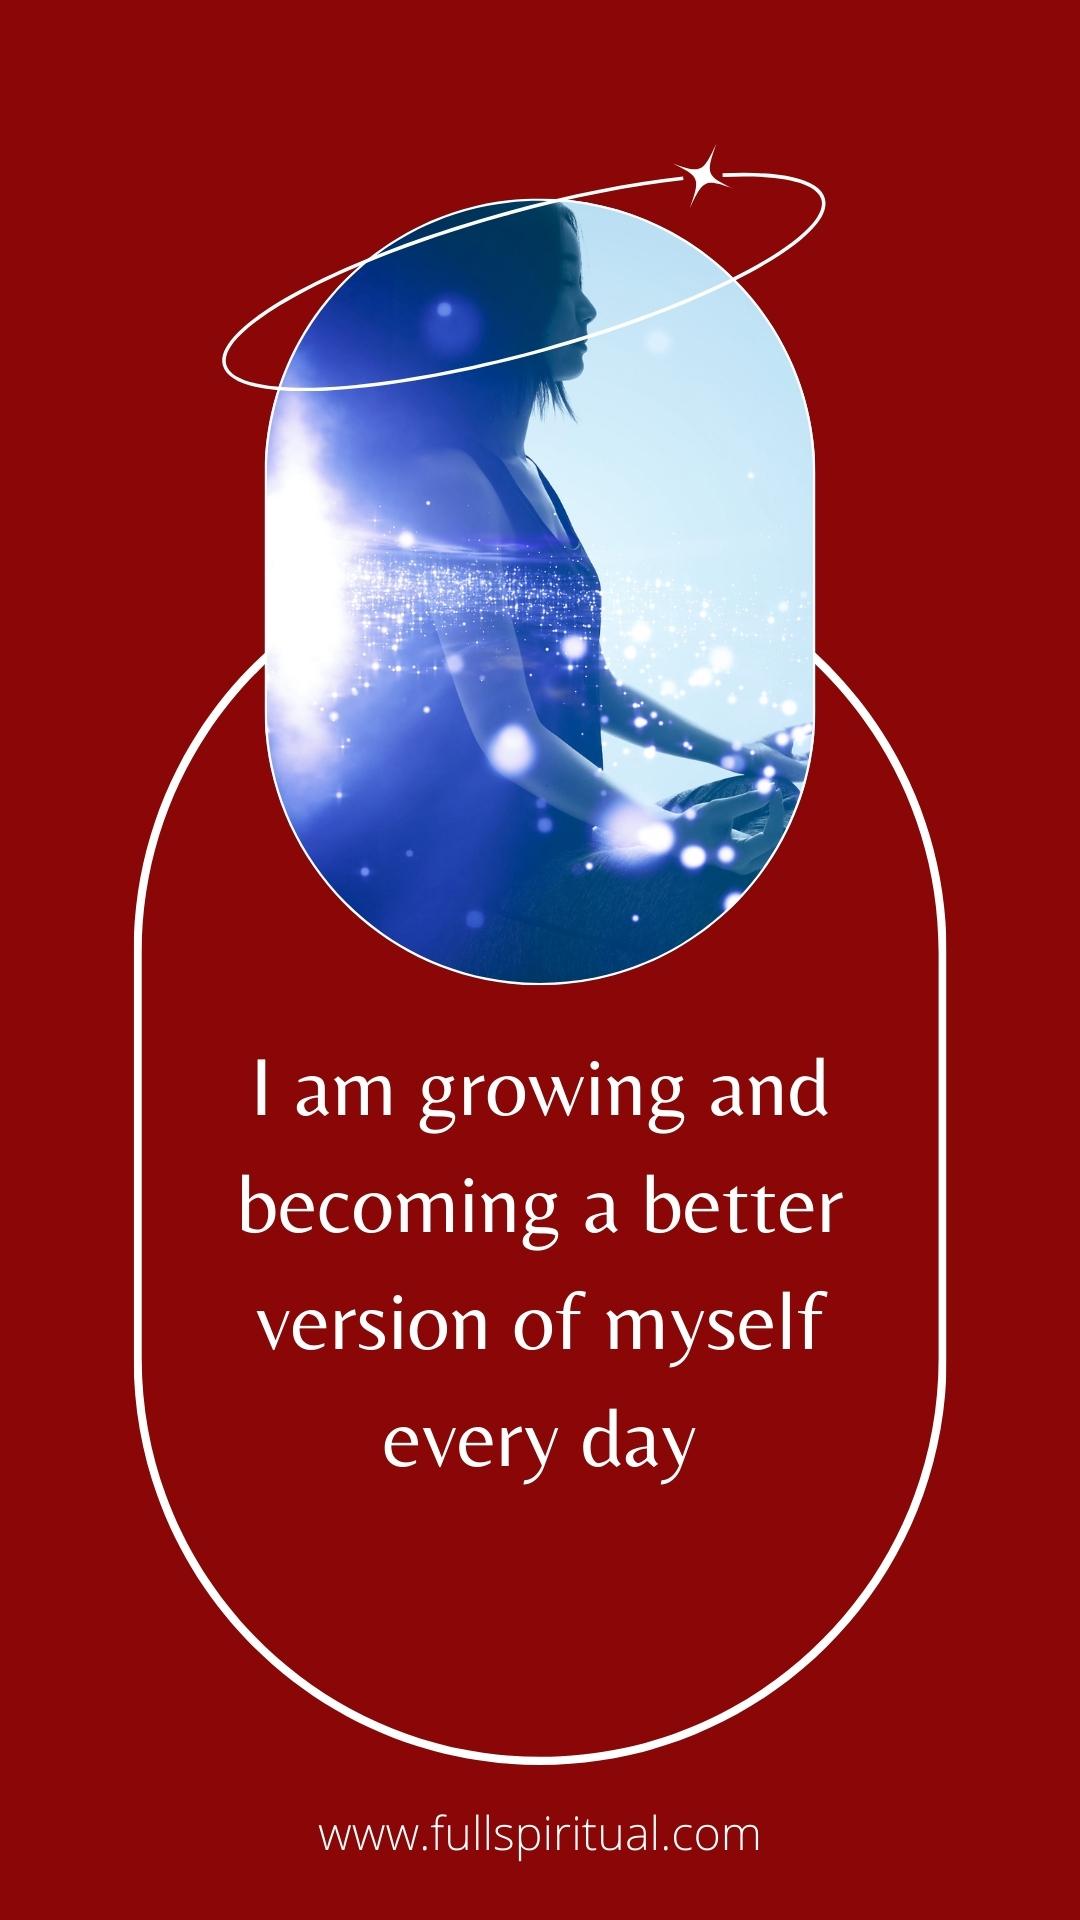 i am growing and becoming a better version of myself everyday